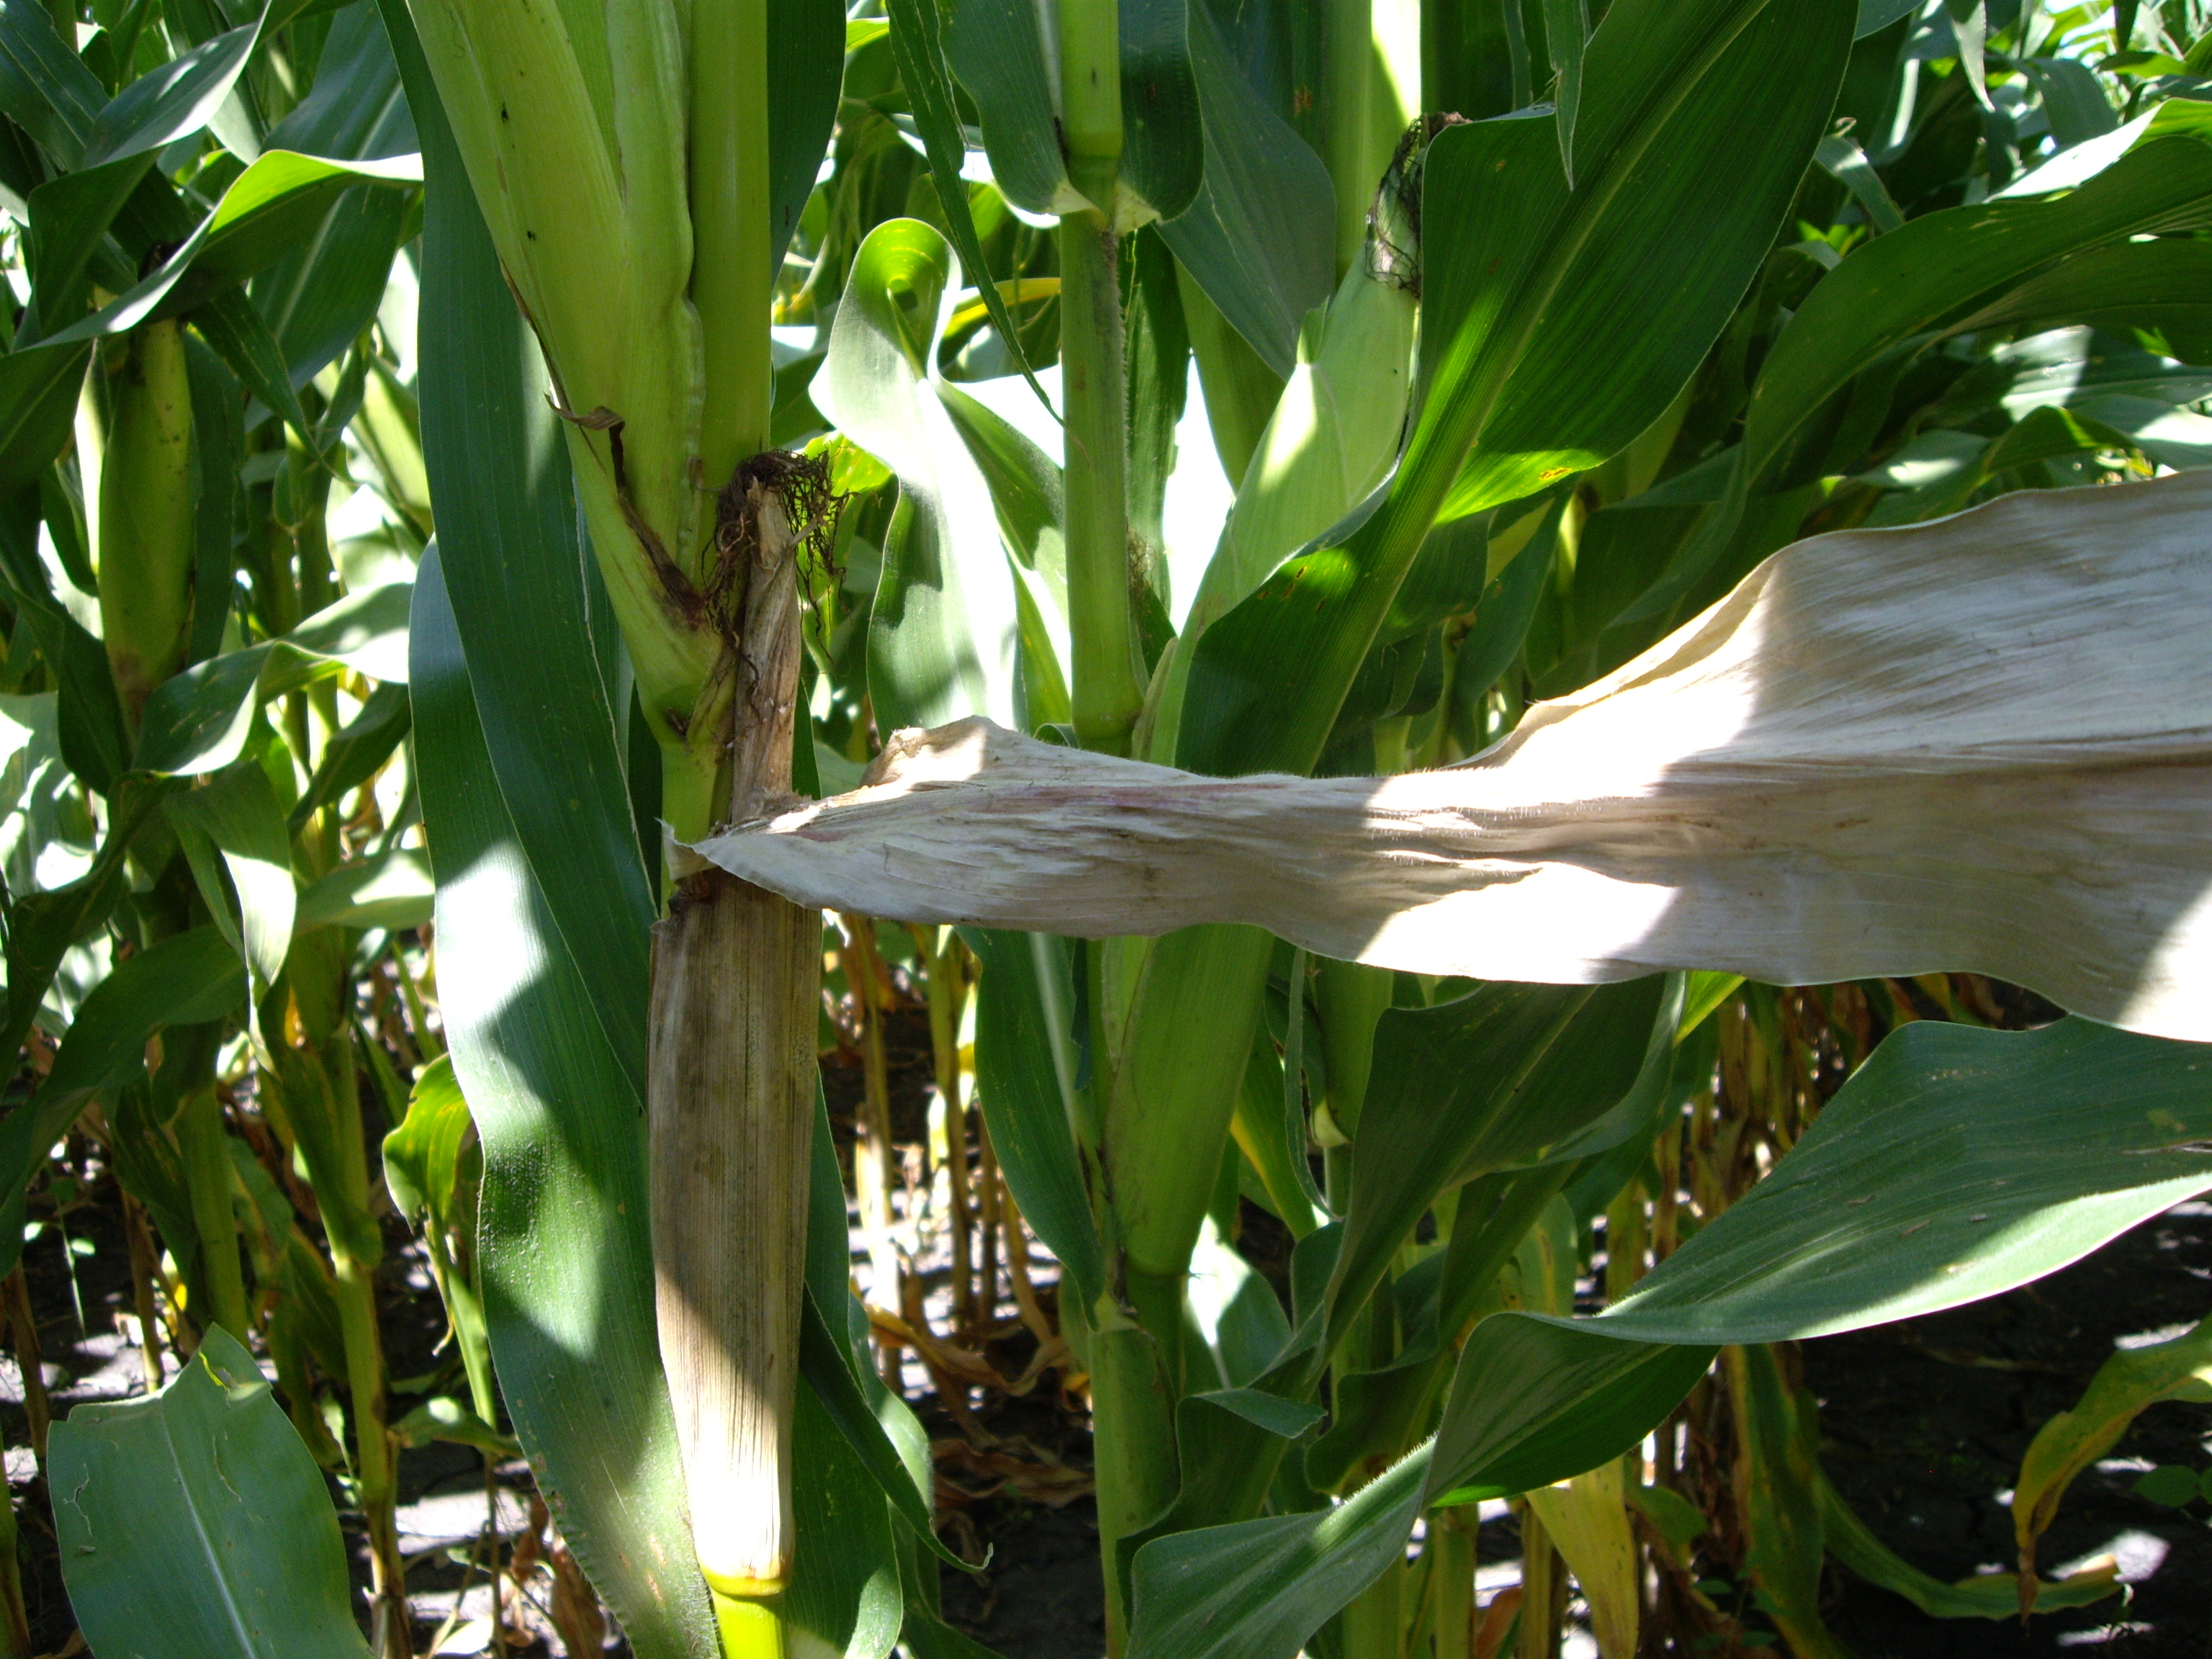 A dead flag leaf is an easily recognized symptom of Diplodia ear rot.